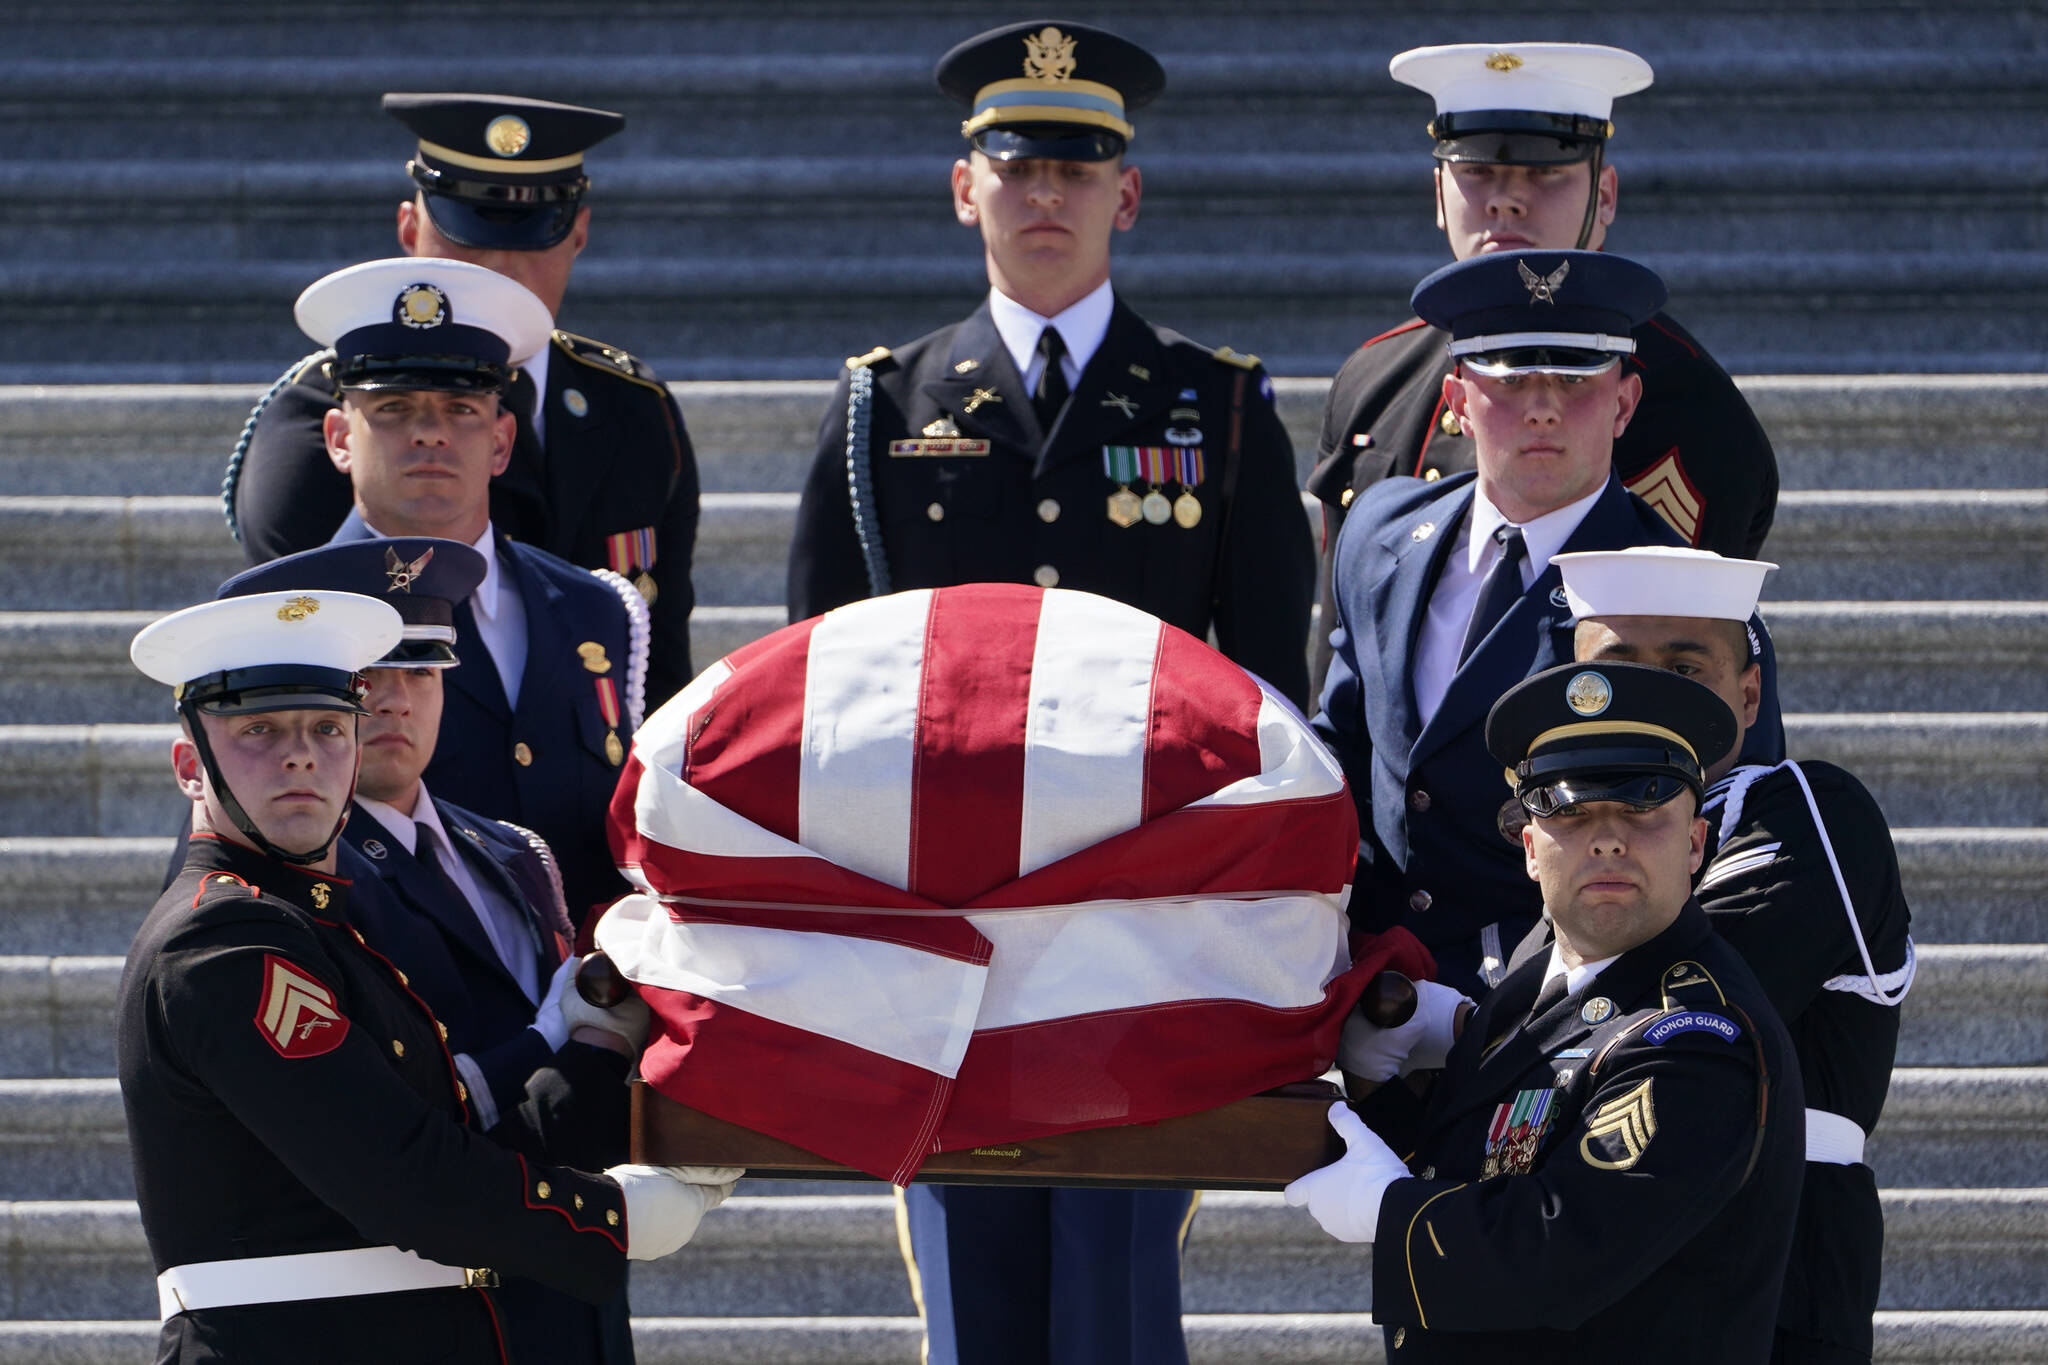 A joint forces honor guard carries the casket of Rep. Don Young, R-Alaska, down the steps of the House of Representatives on Capitol Hill in Washington, Tuesday, March 29, 2022. Young, the longest-serving member of Alaska’s congressional delegation, died Friday, March 18, 2022. He was 88. (AP Photo/Susan Walsh)
A joint forces honor guard carries the casket of Rep. Don Young, R-Alaska, down the steps of the House of Representatives on Capitol Hill in Washington, Tuesday, March 29, 2022. Young, the longest-serving member of Alaska’s congressional delegation, died Friday, March 18, 2022. He was 88. (AP Photo/Susan Walsh)